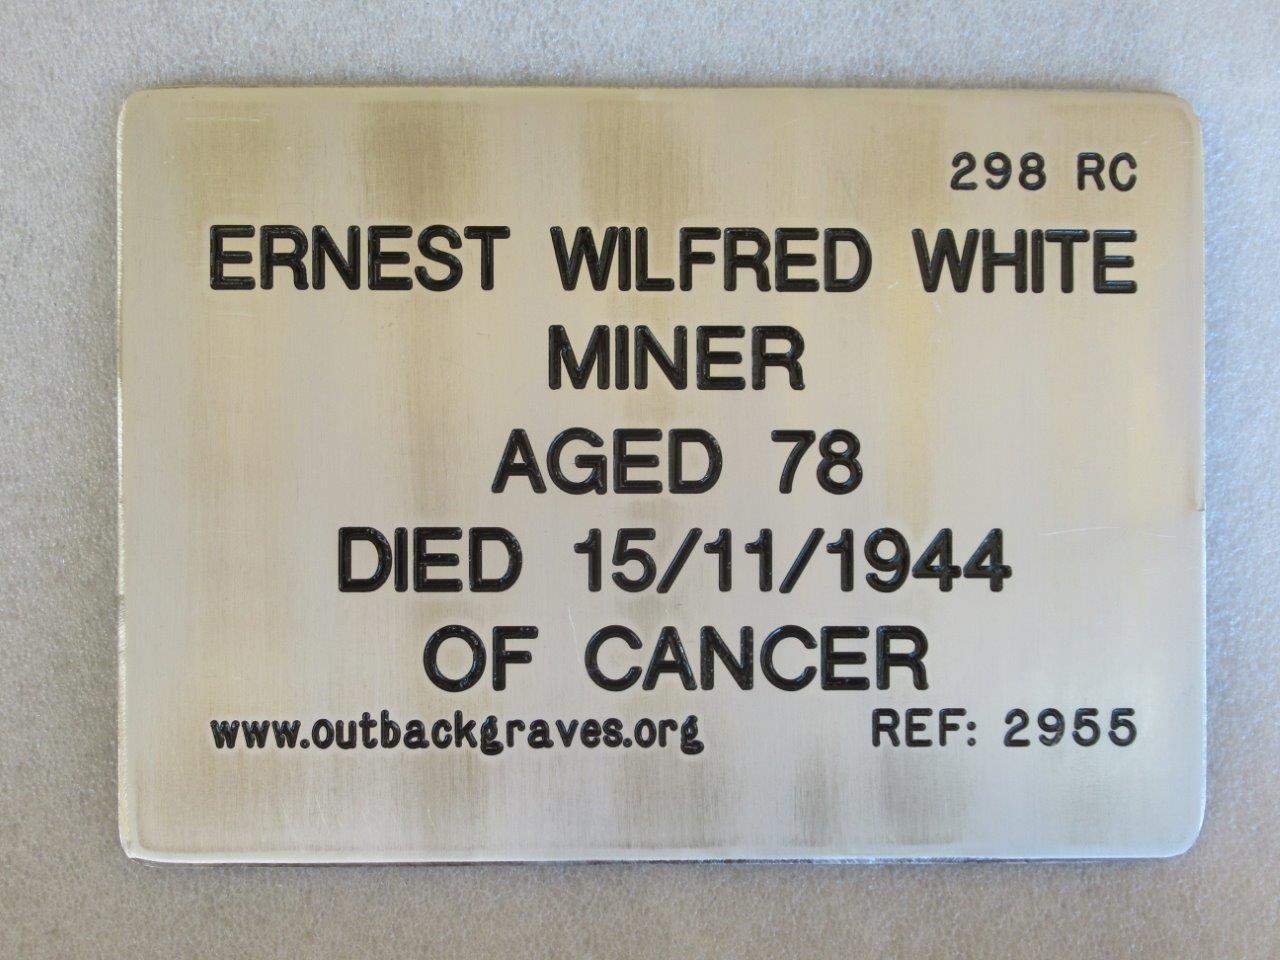 This is a photograph of plaque number 2955 for ERNEST WILFRED WHITE at LEONORA